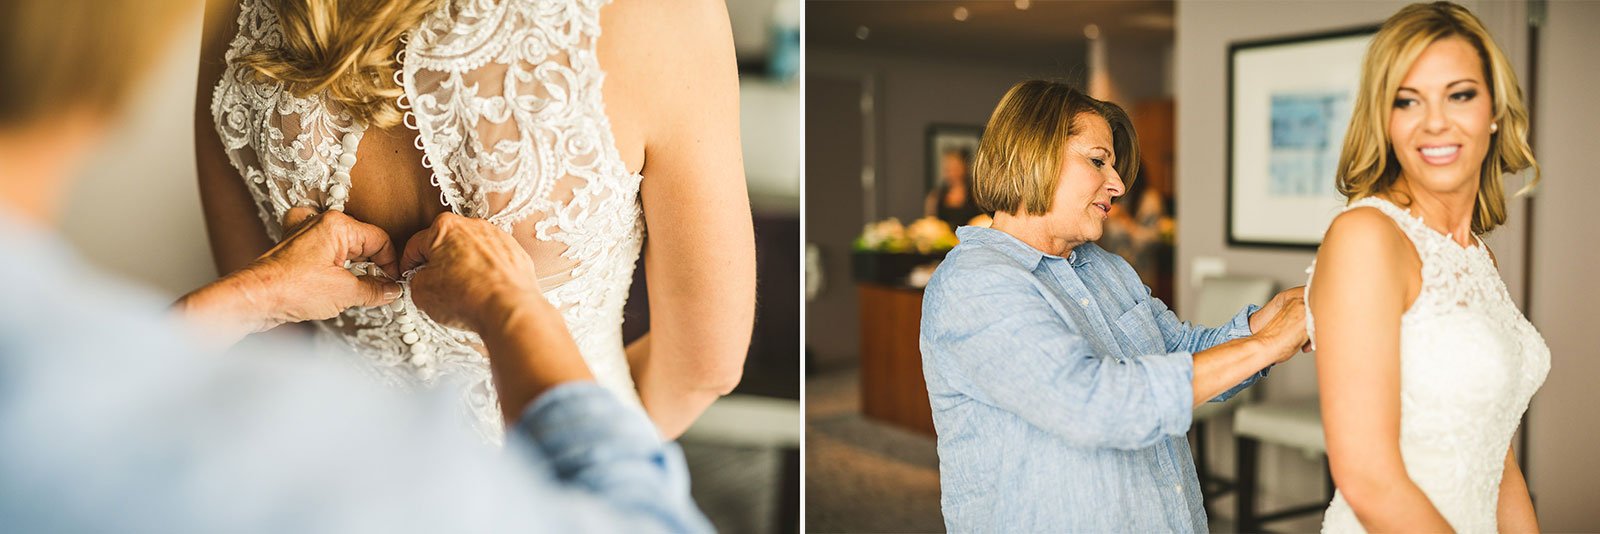 11 bride getting ready for her wedding - Chicago Wedding Photography at Gallery 1028 // Courtnie + David